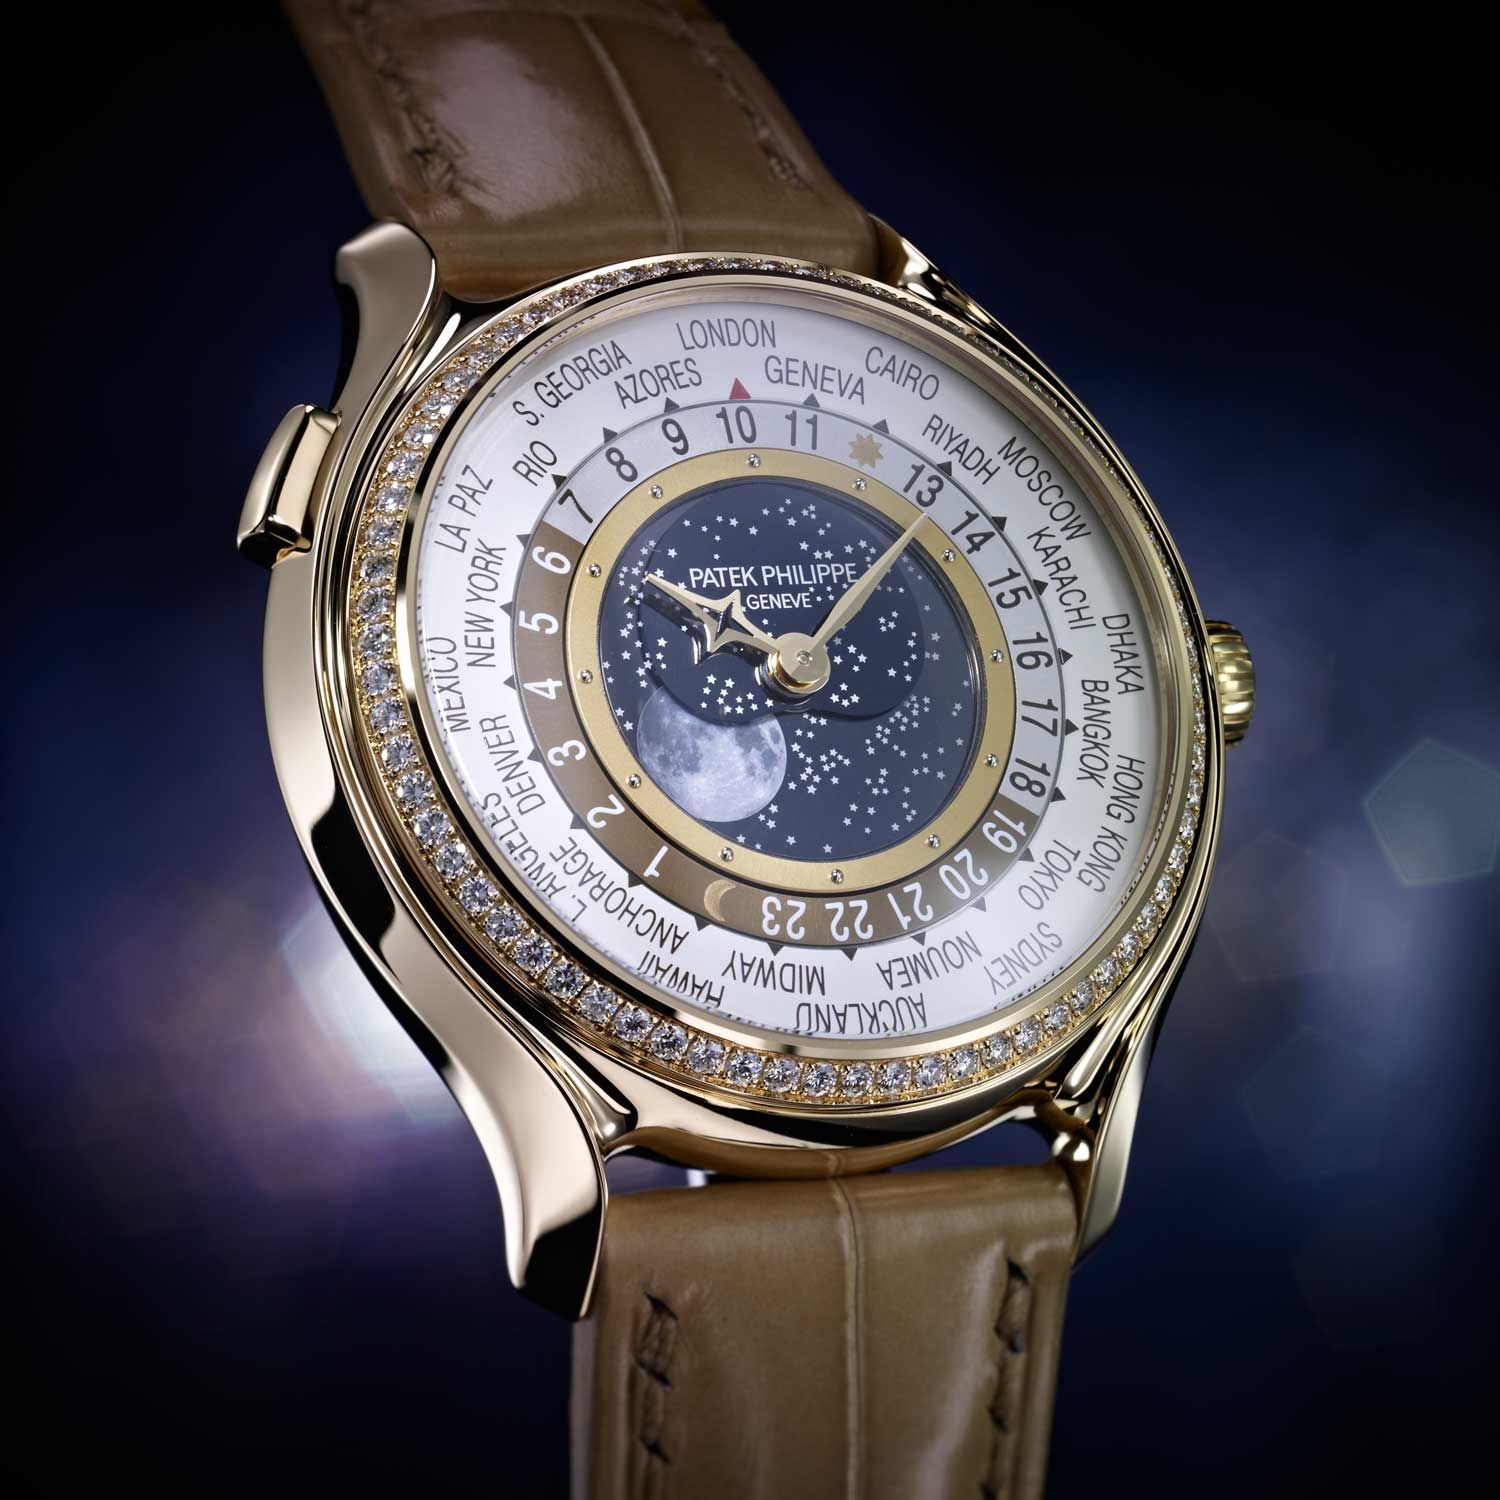 Launched as part of Patek Philippe’s 175th anniversary celebrations, the ref. 7175 had a 38mm rose gold case and its dial presented a hyper realistic moonphase (Image: Patek Philippe)